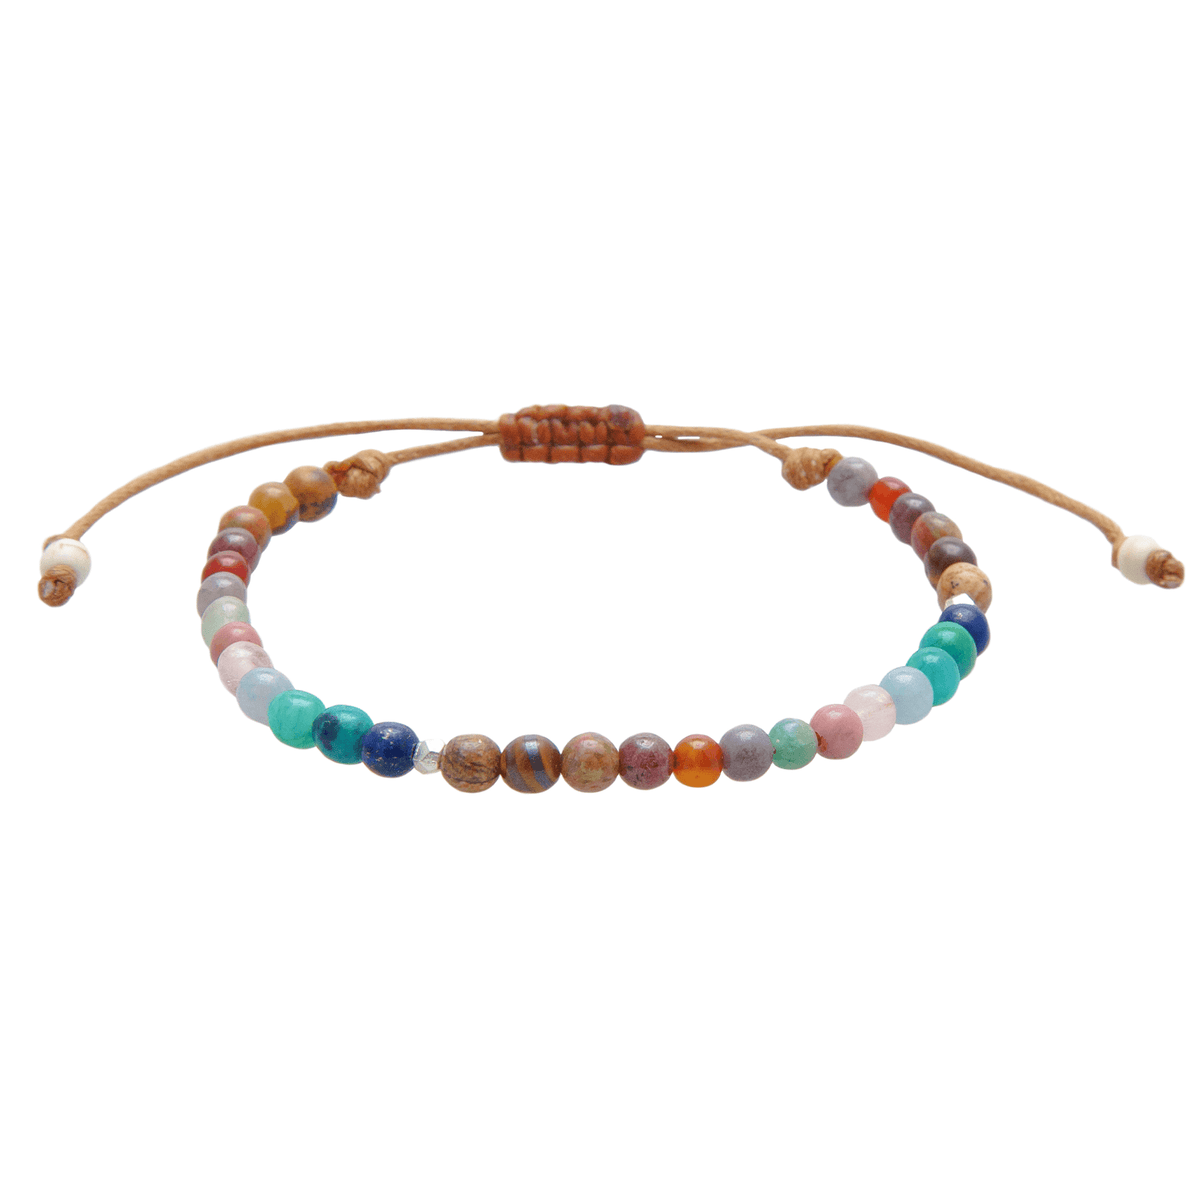 4mm multicolor bead bracelet with cotton pull through closure